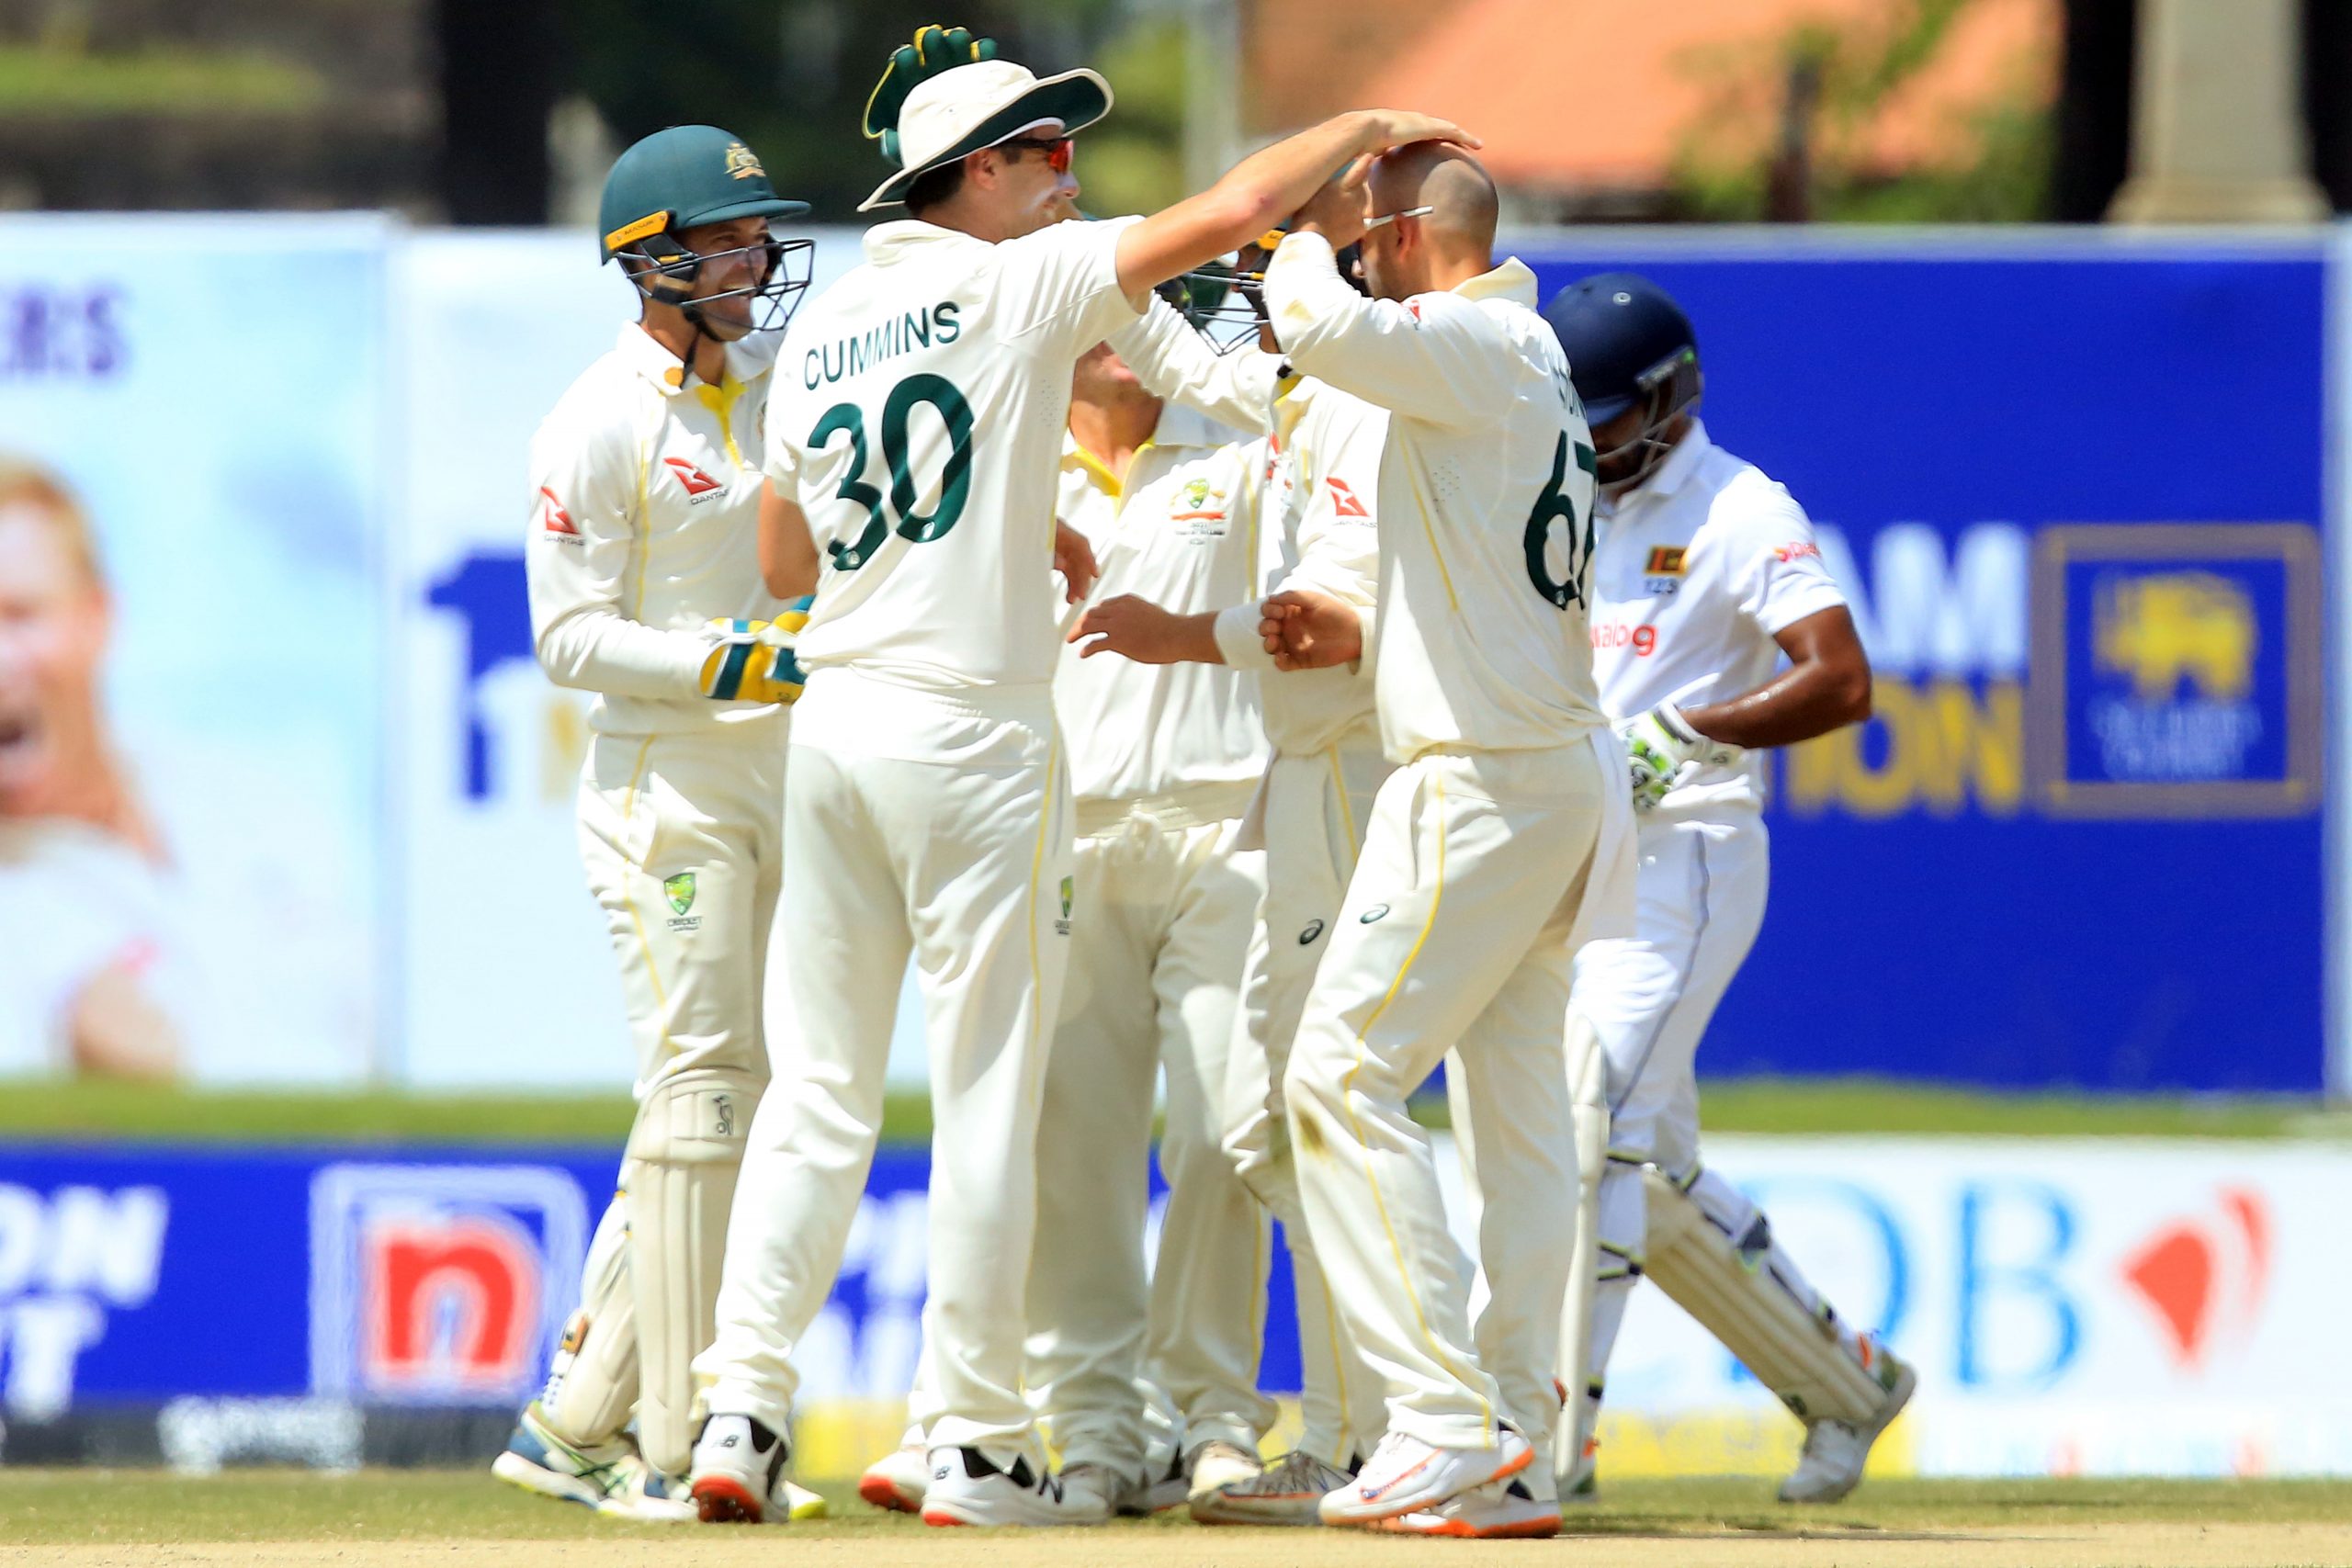 Sri Lanka cave in 10-wicket defeat before lunch